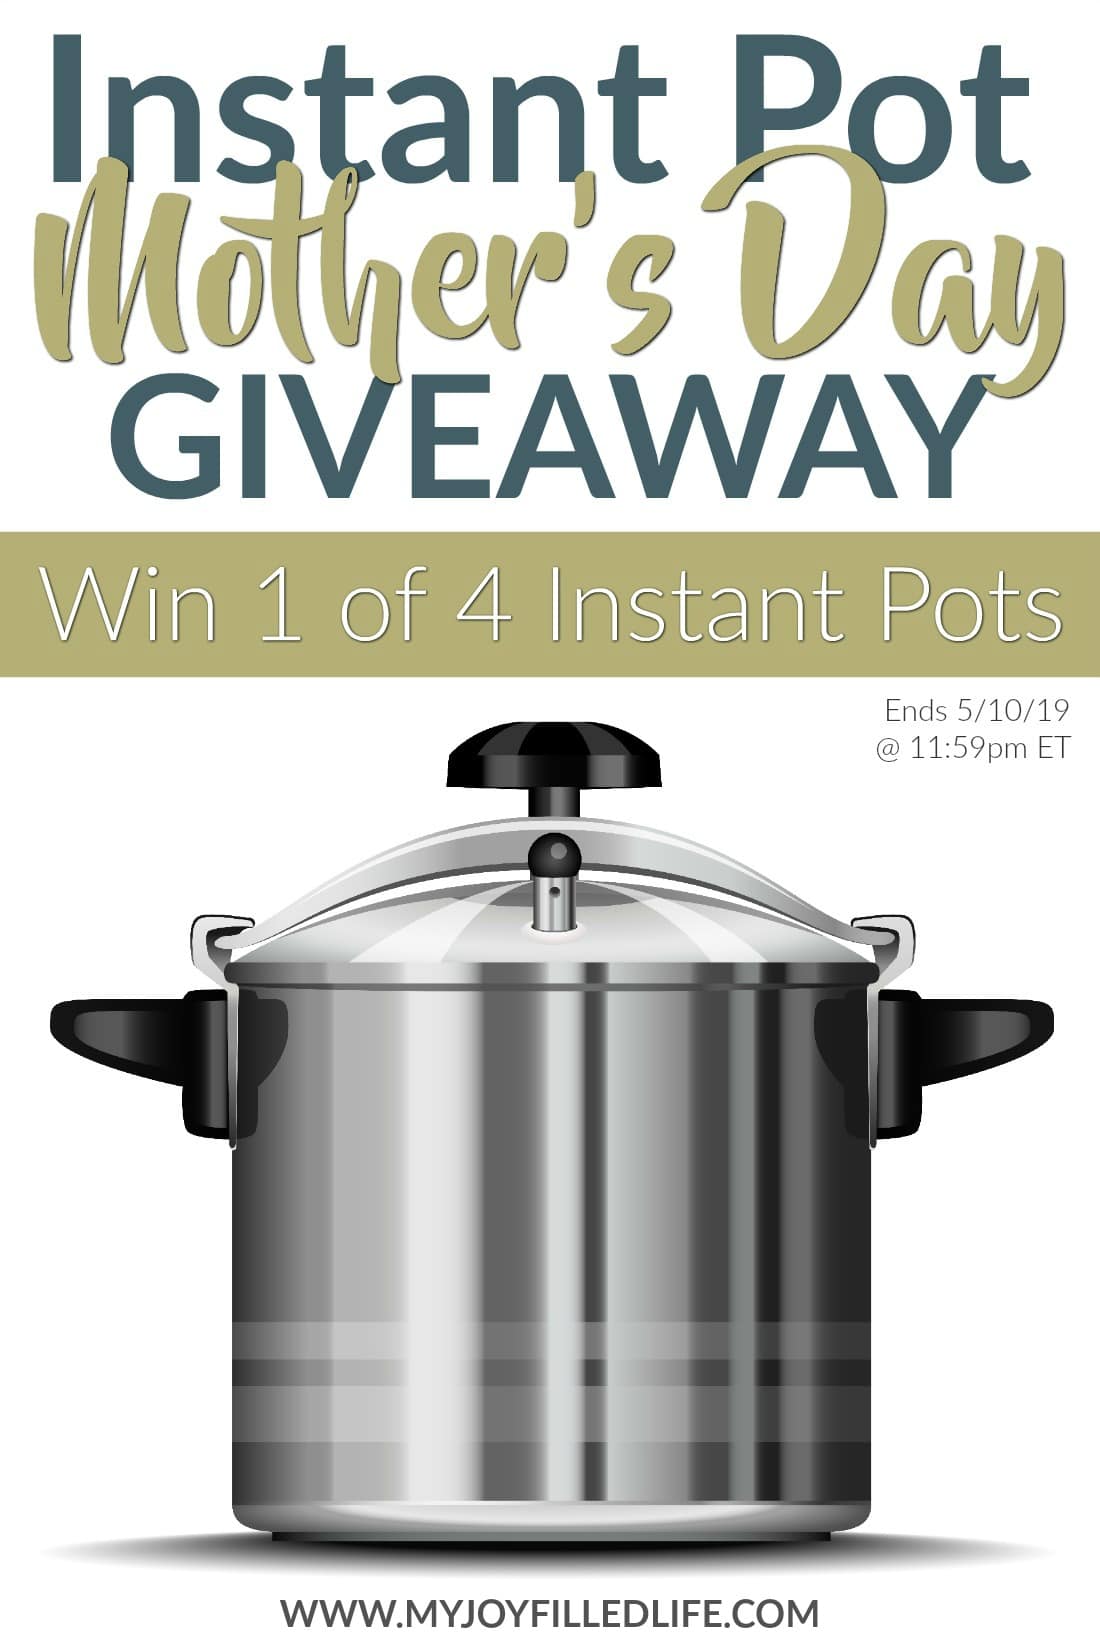 Enter to win one of four Instant Pots for Mother's Day! #InstantPot #Giveaway #instantpotgiveaway